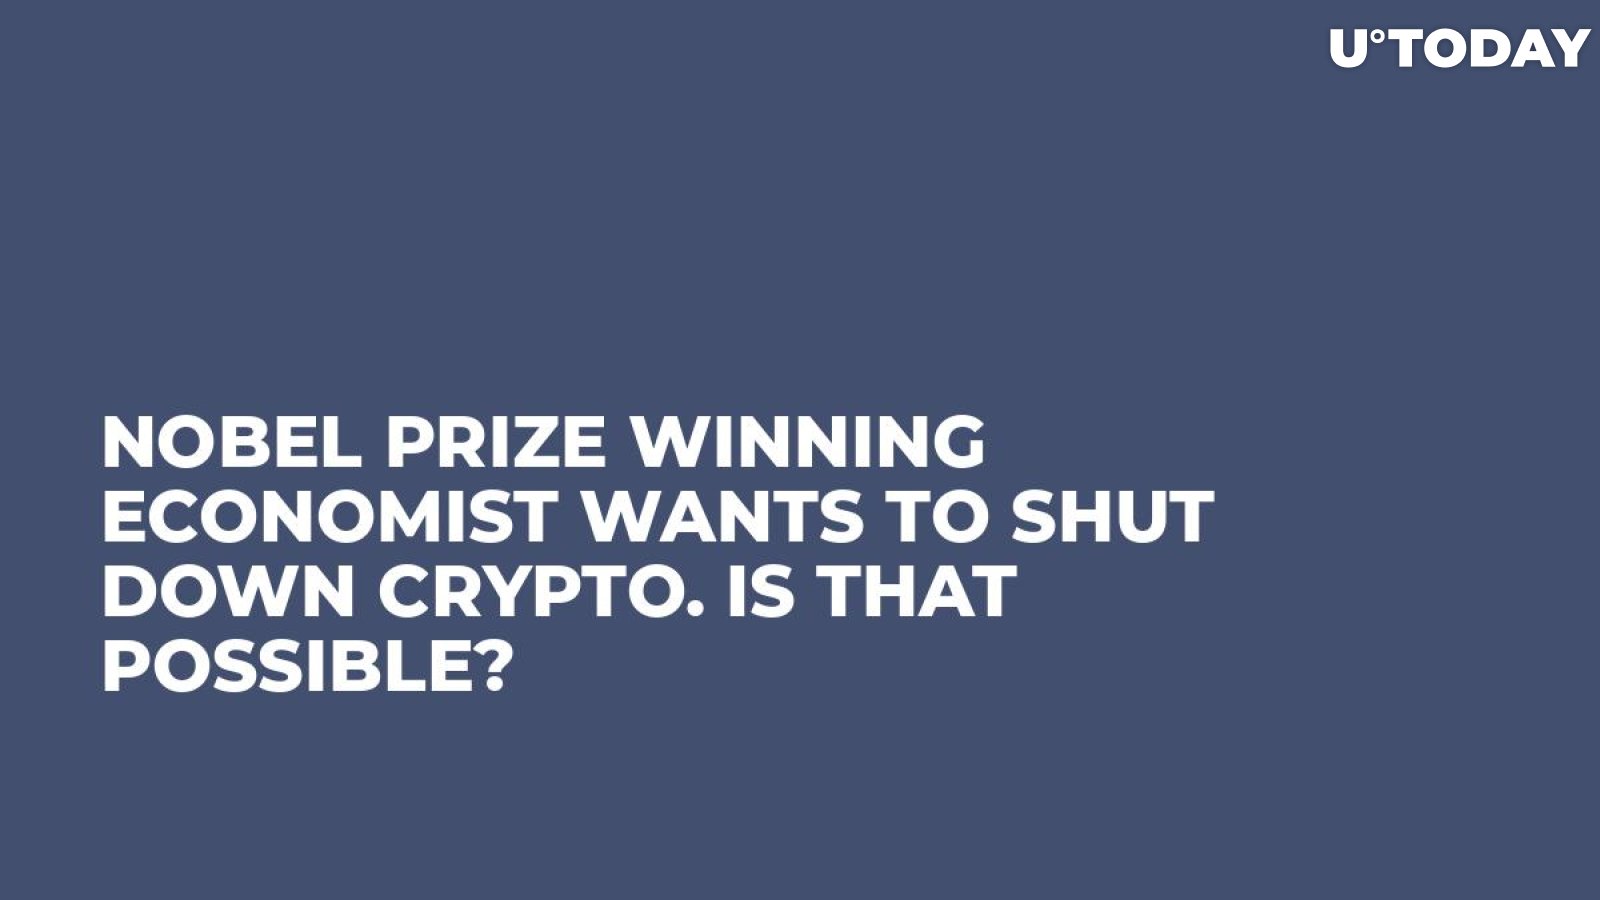 Nobel Prize Winning Economist Wants to Shut Down Crypto. Is That Possible?